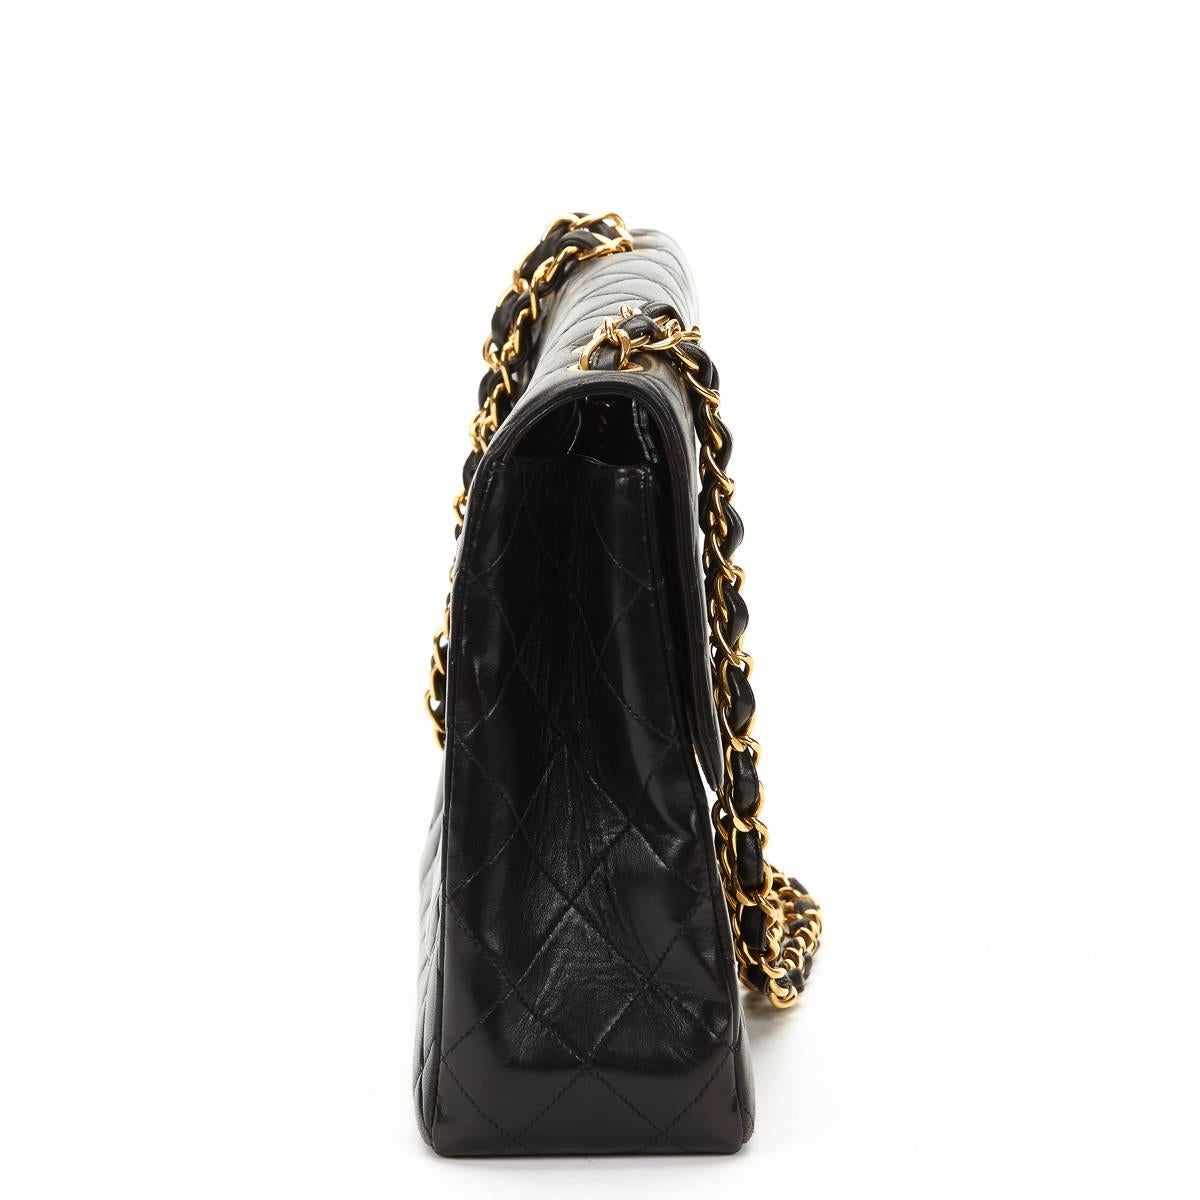 "CHANEL
Black Quilted Lambskin Vintage Jumbo XL Flap Bag

This CHANEL Jumbo XL Flap Bag is in Excellent Pre-Owned Condition. Circa 1996. Primarily made from Lambskin Leather complimented by Gold hardware. Our  reference is HB638 should you